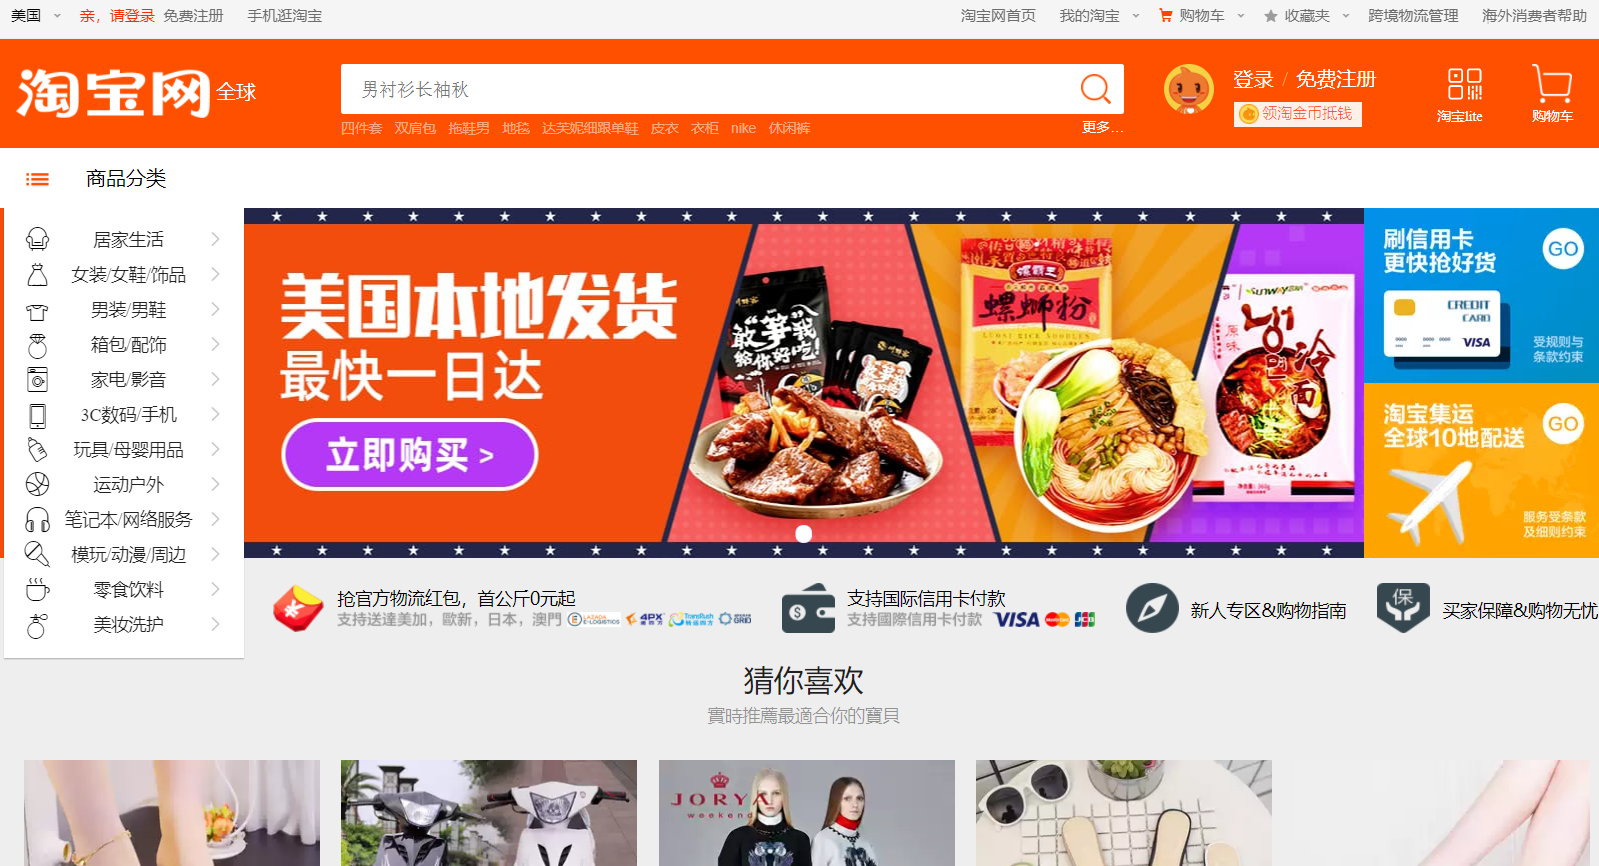 Taobao is one of the best sites like Alibaba